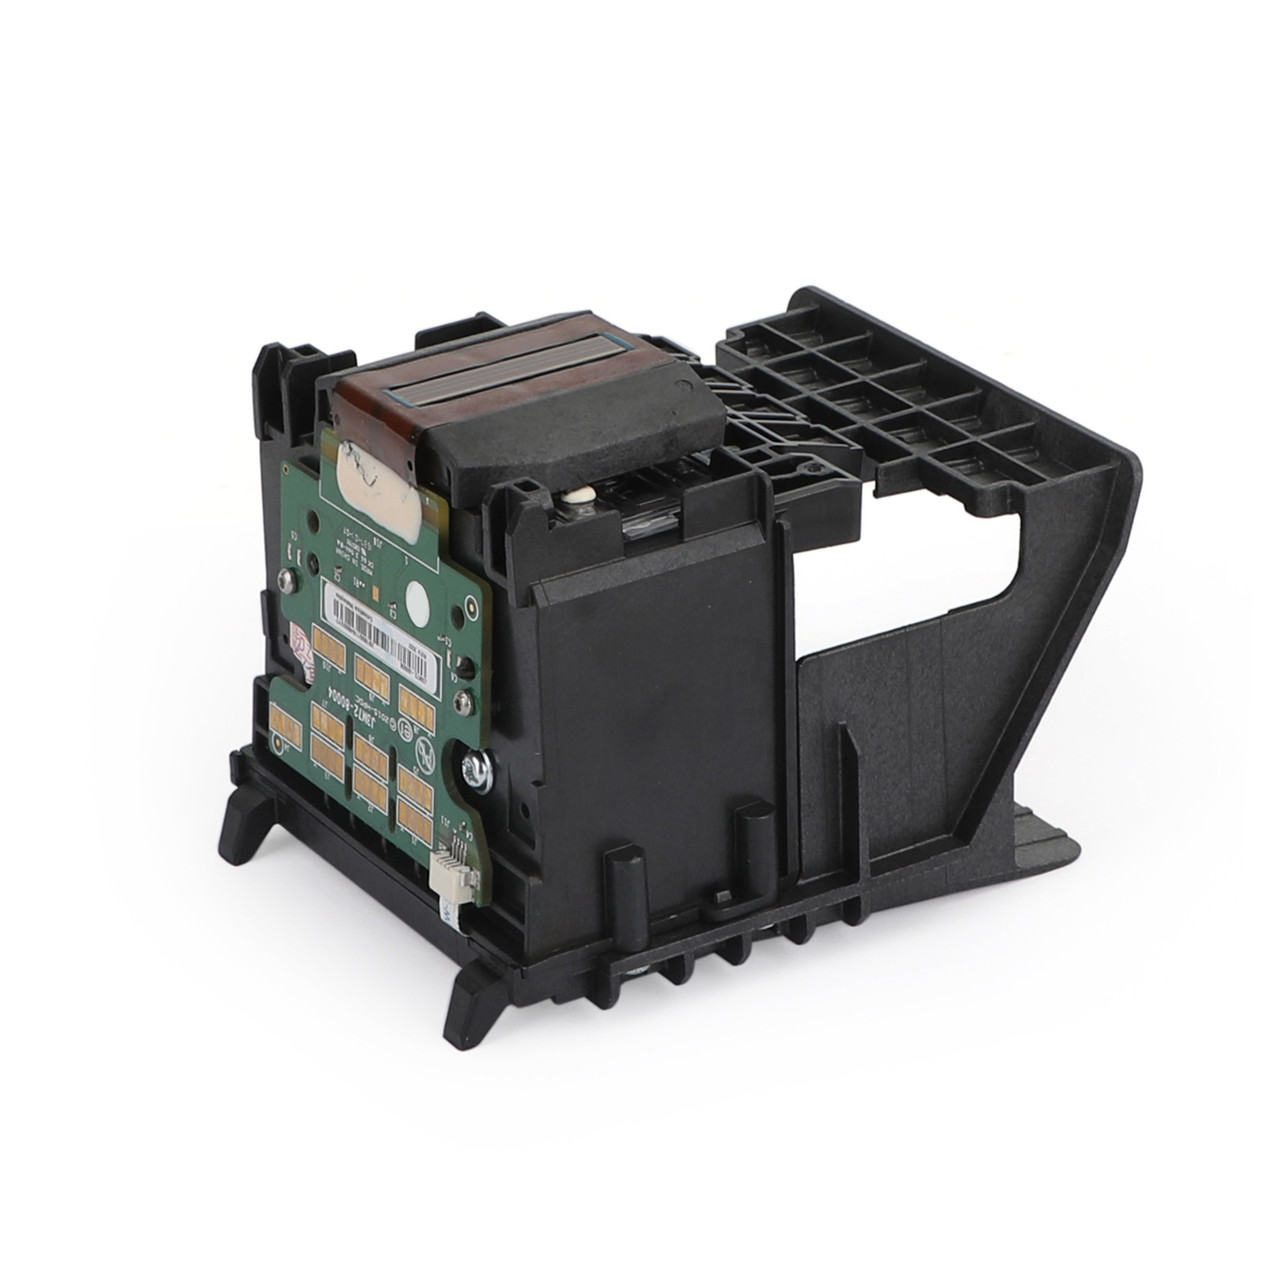 Hot Selling 952 955 Print head Fit for Hp 8710 8210 8216 7740 7720 8720 8730 8740 953 954